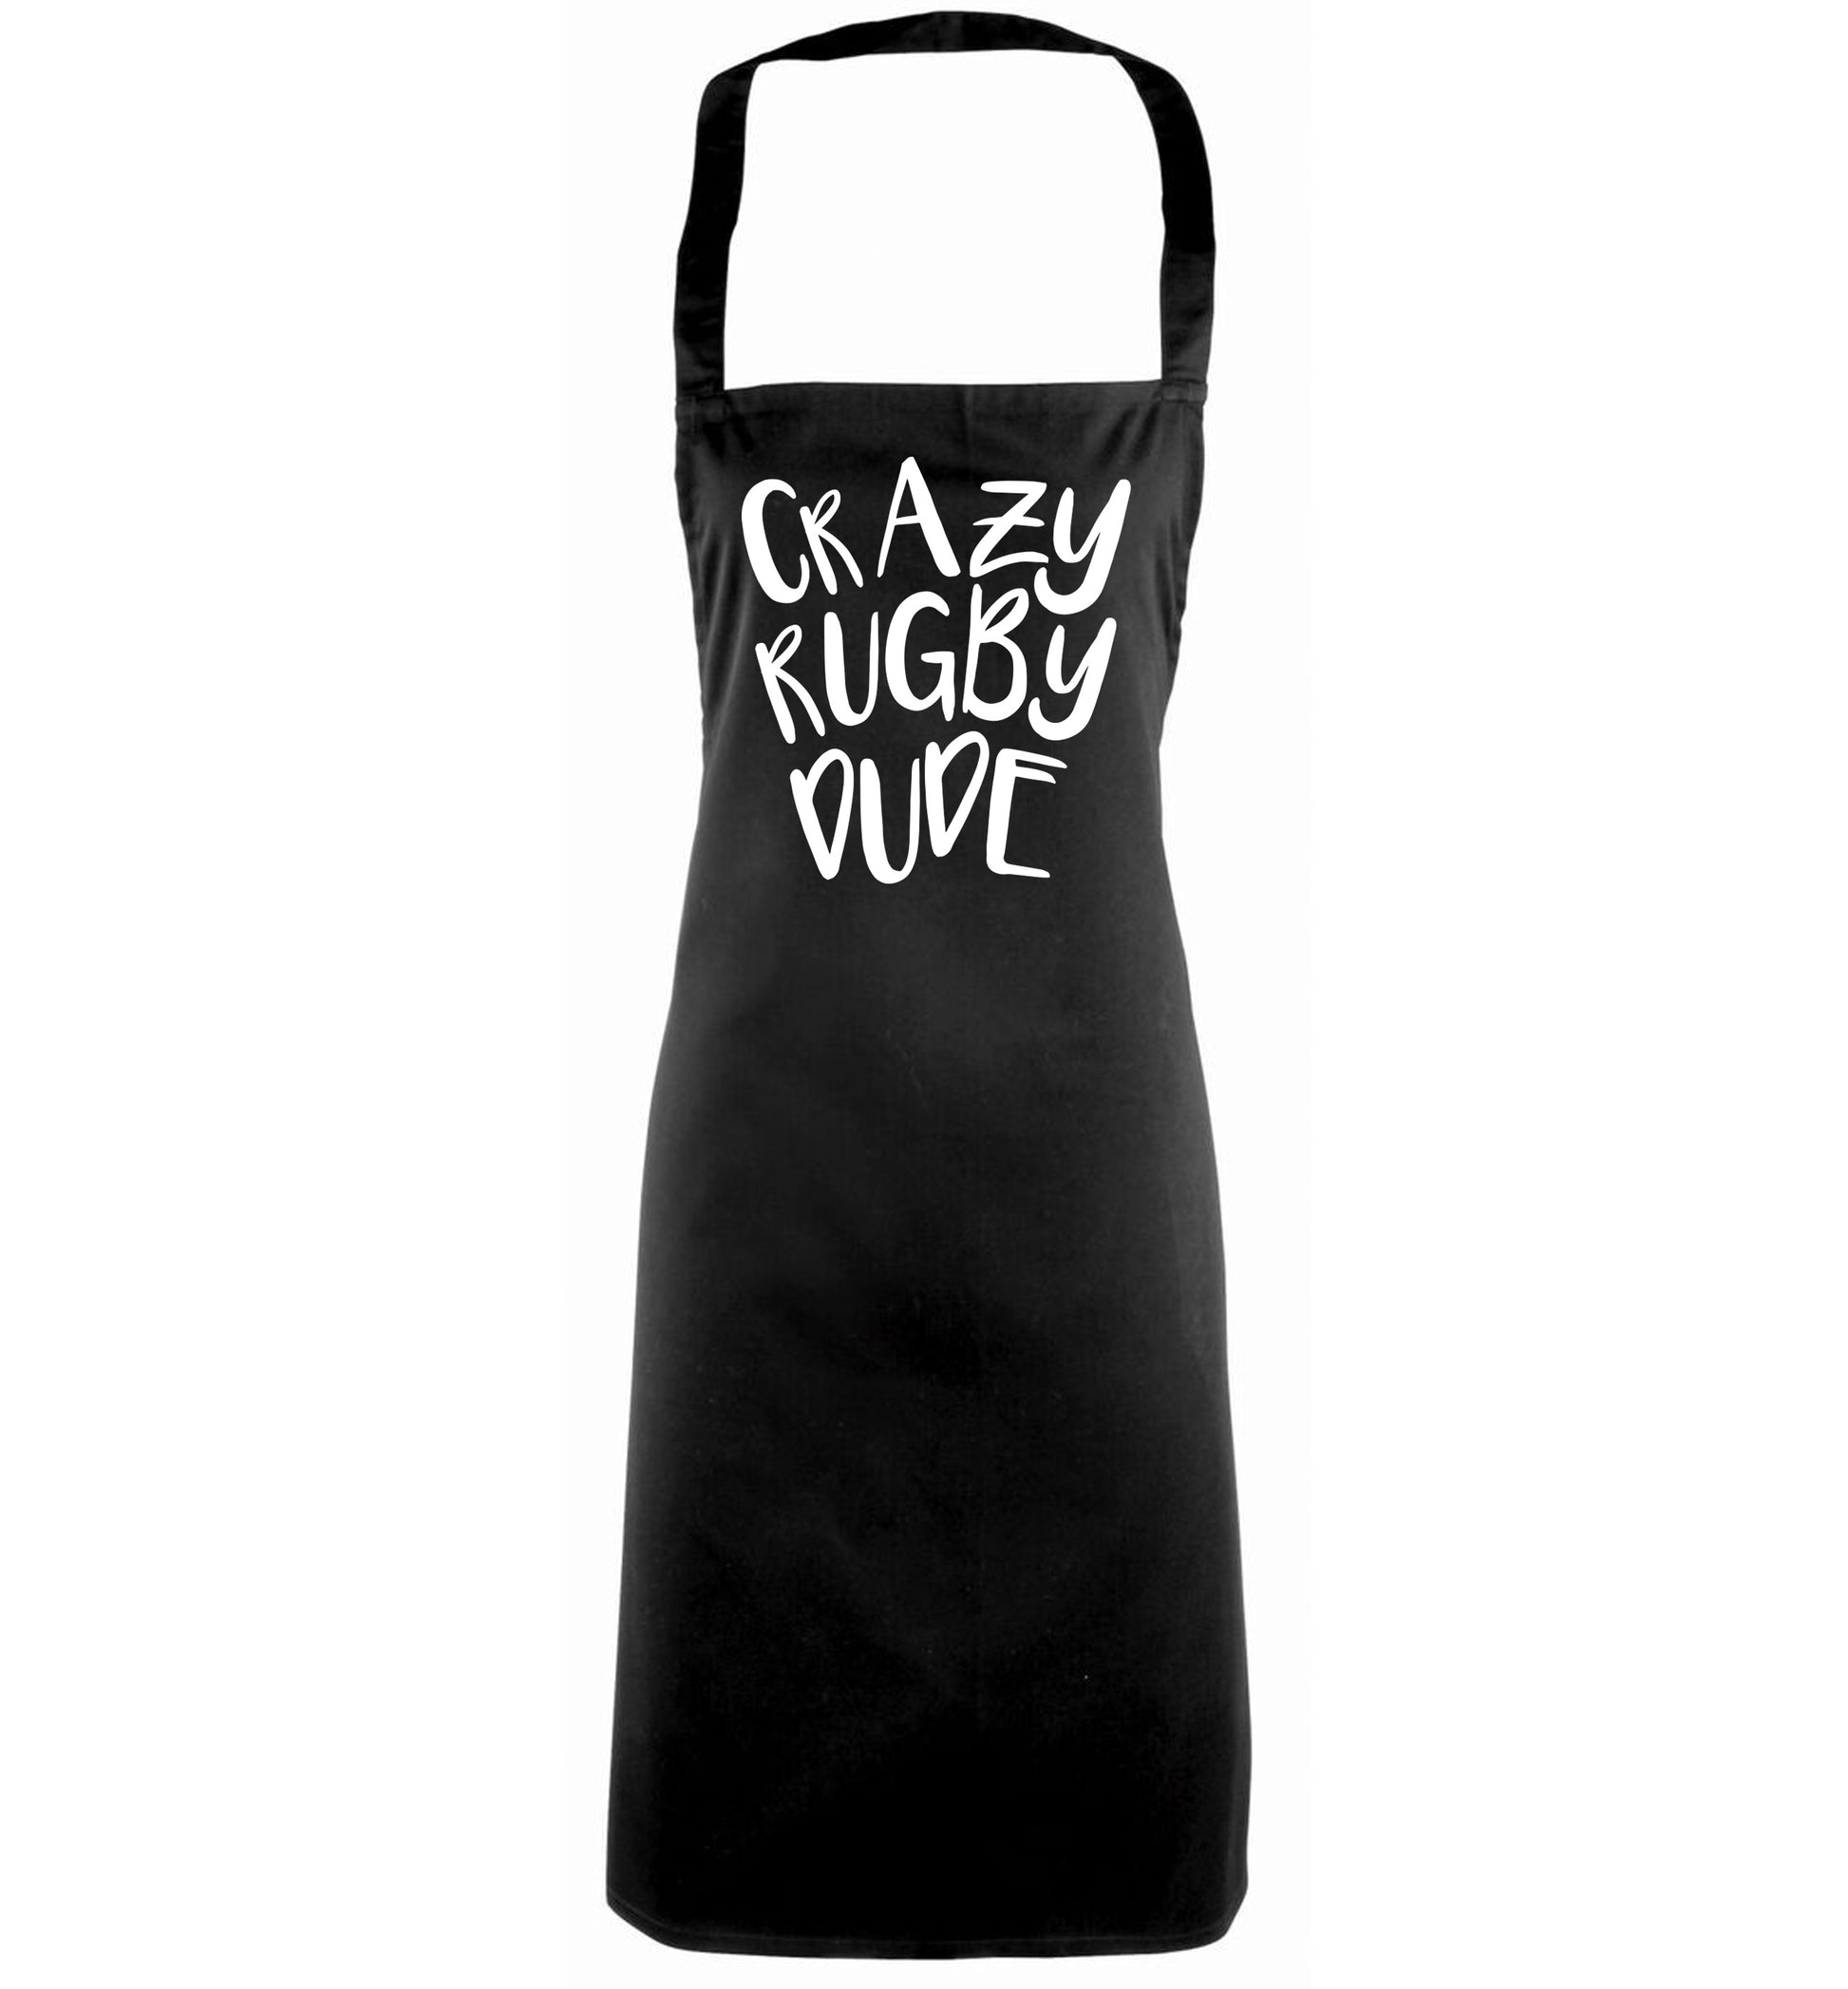 Crazy rugby dude black apron